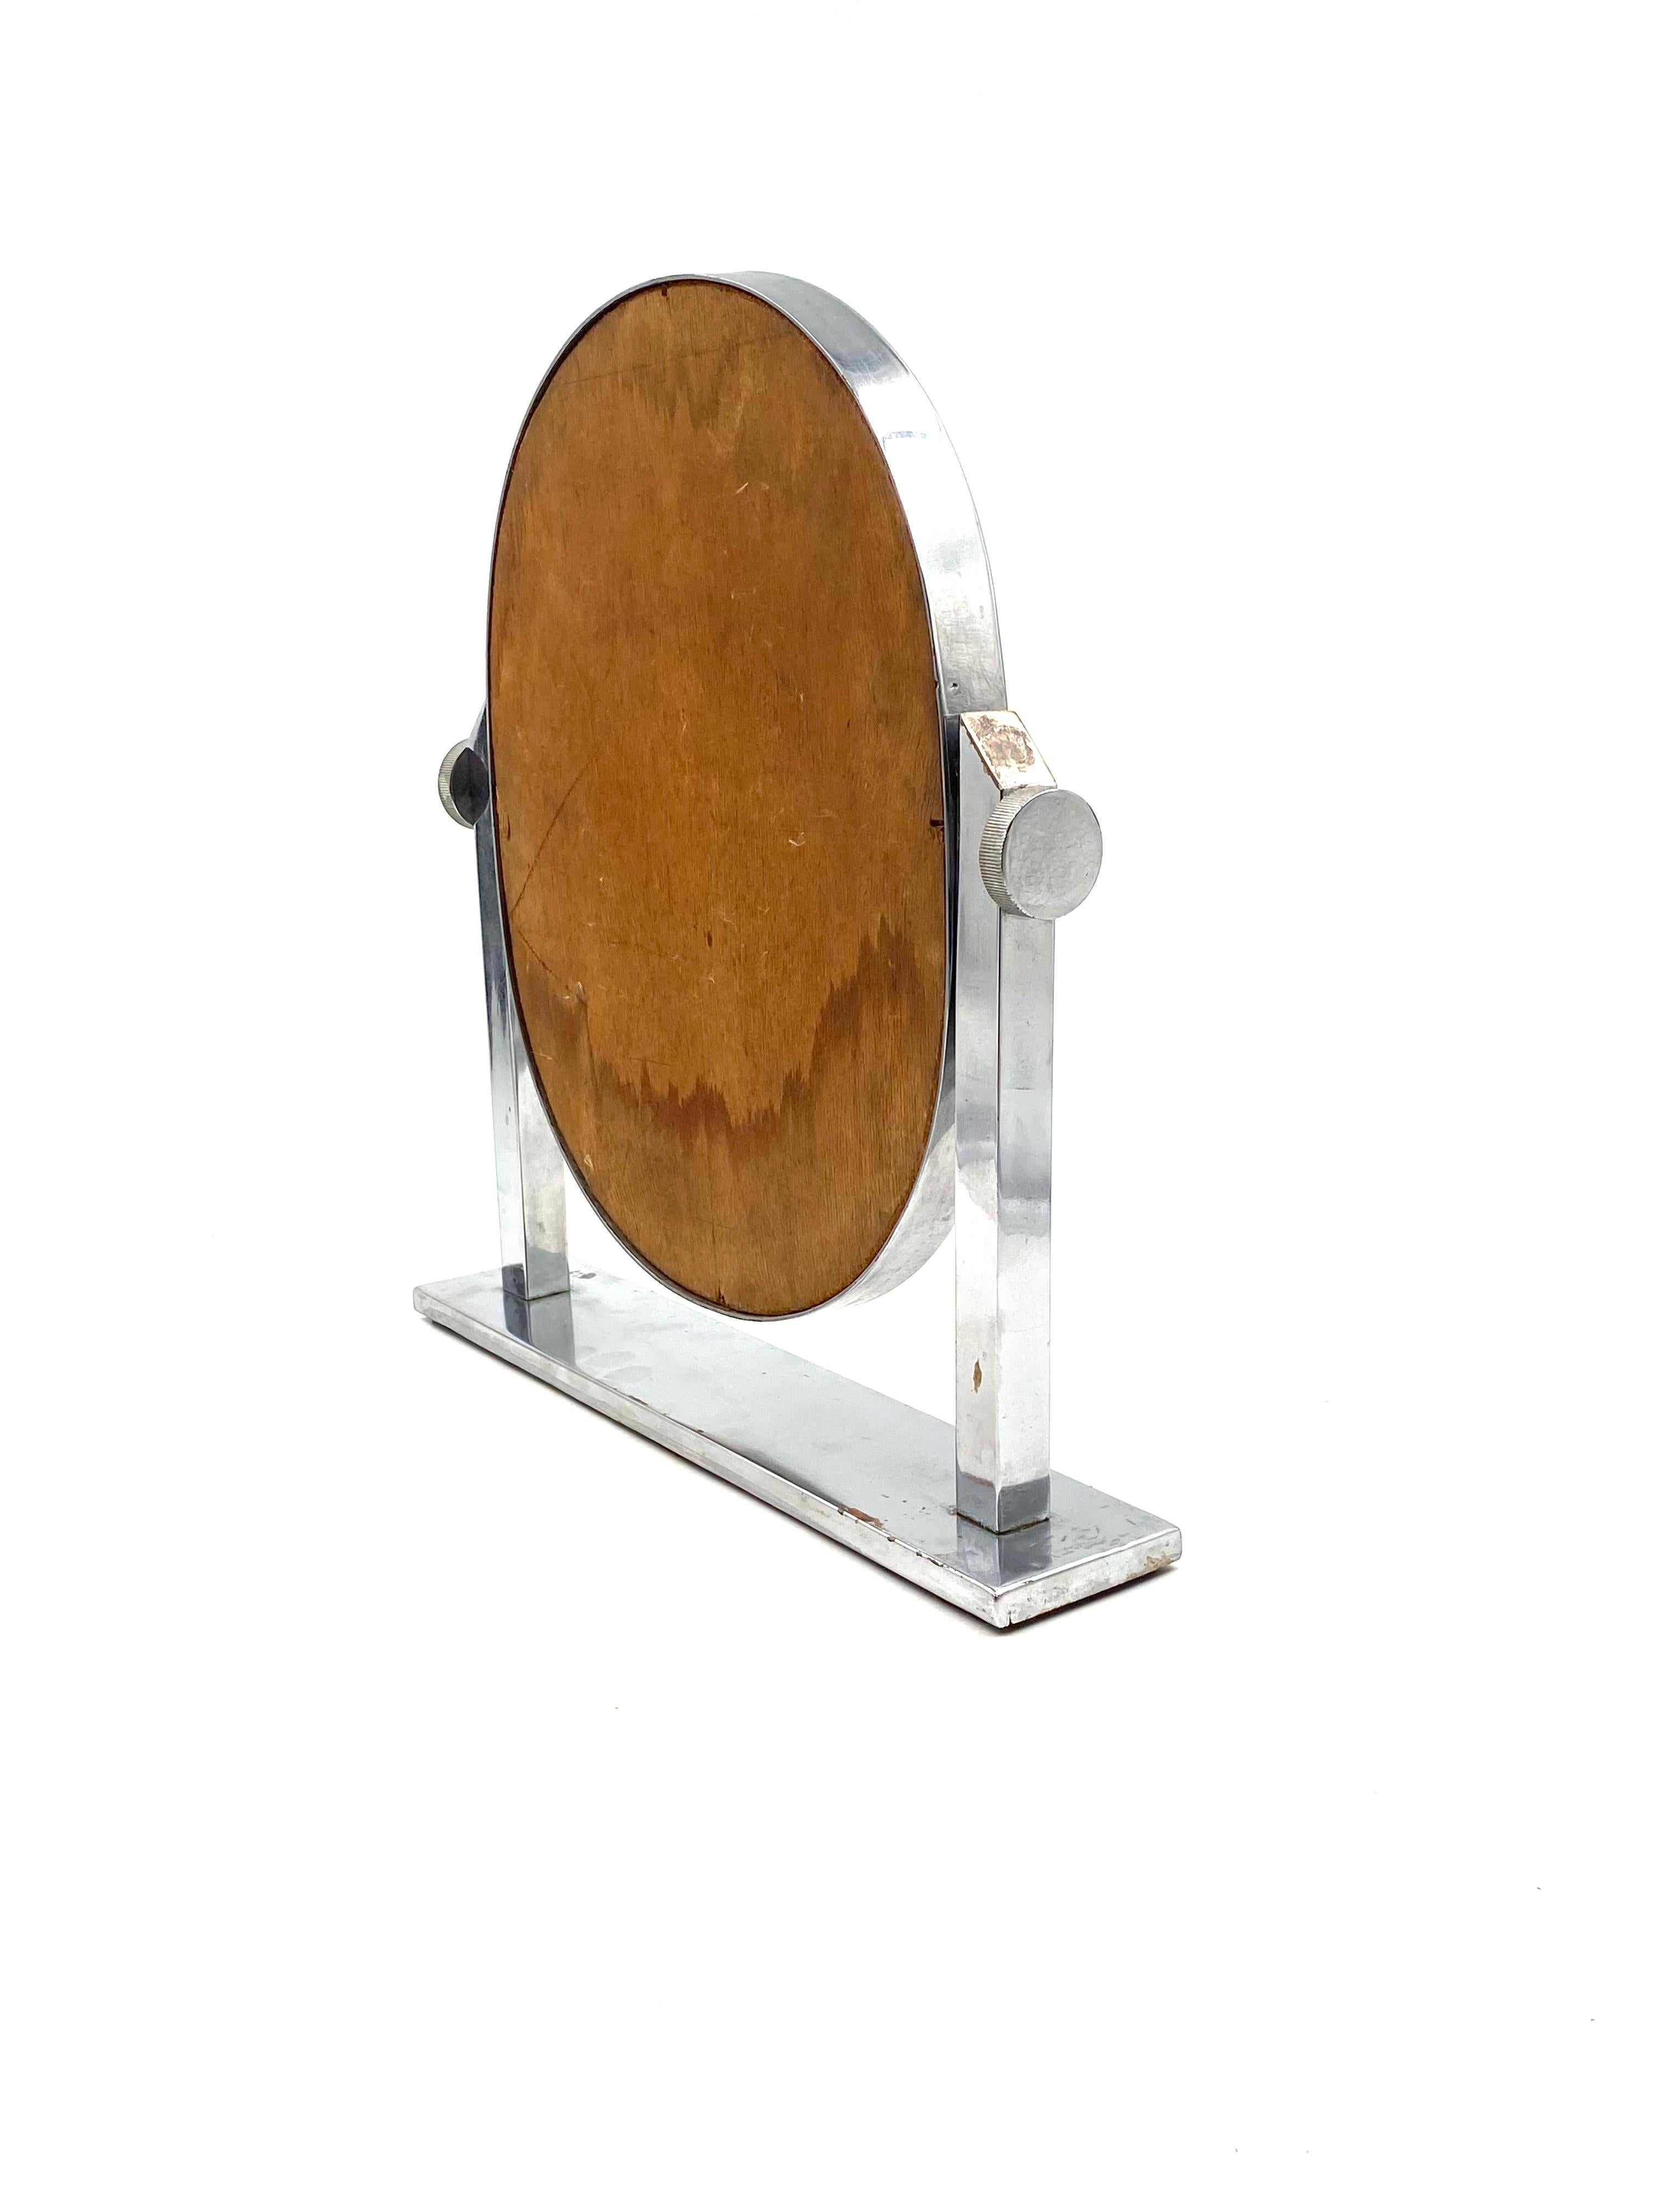 Midcentury Nickel-Plated Brass Table Mirror / Vanity, Italy, 1960s For Sale 9